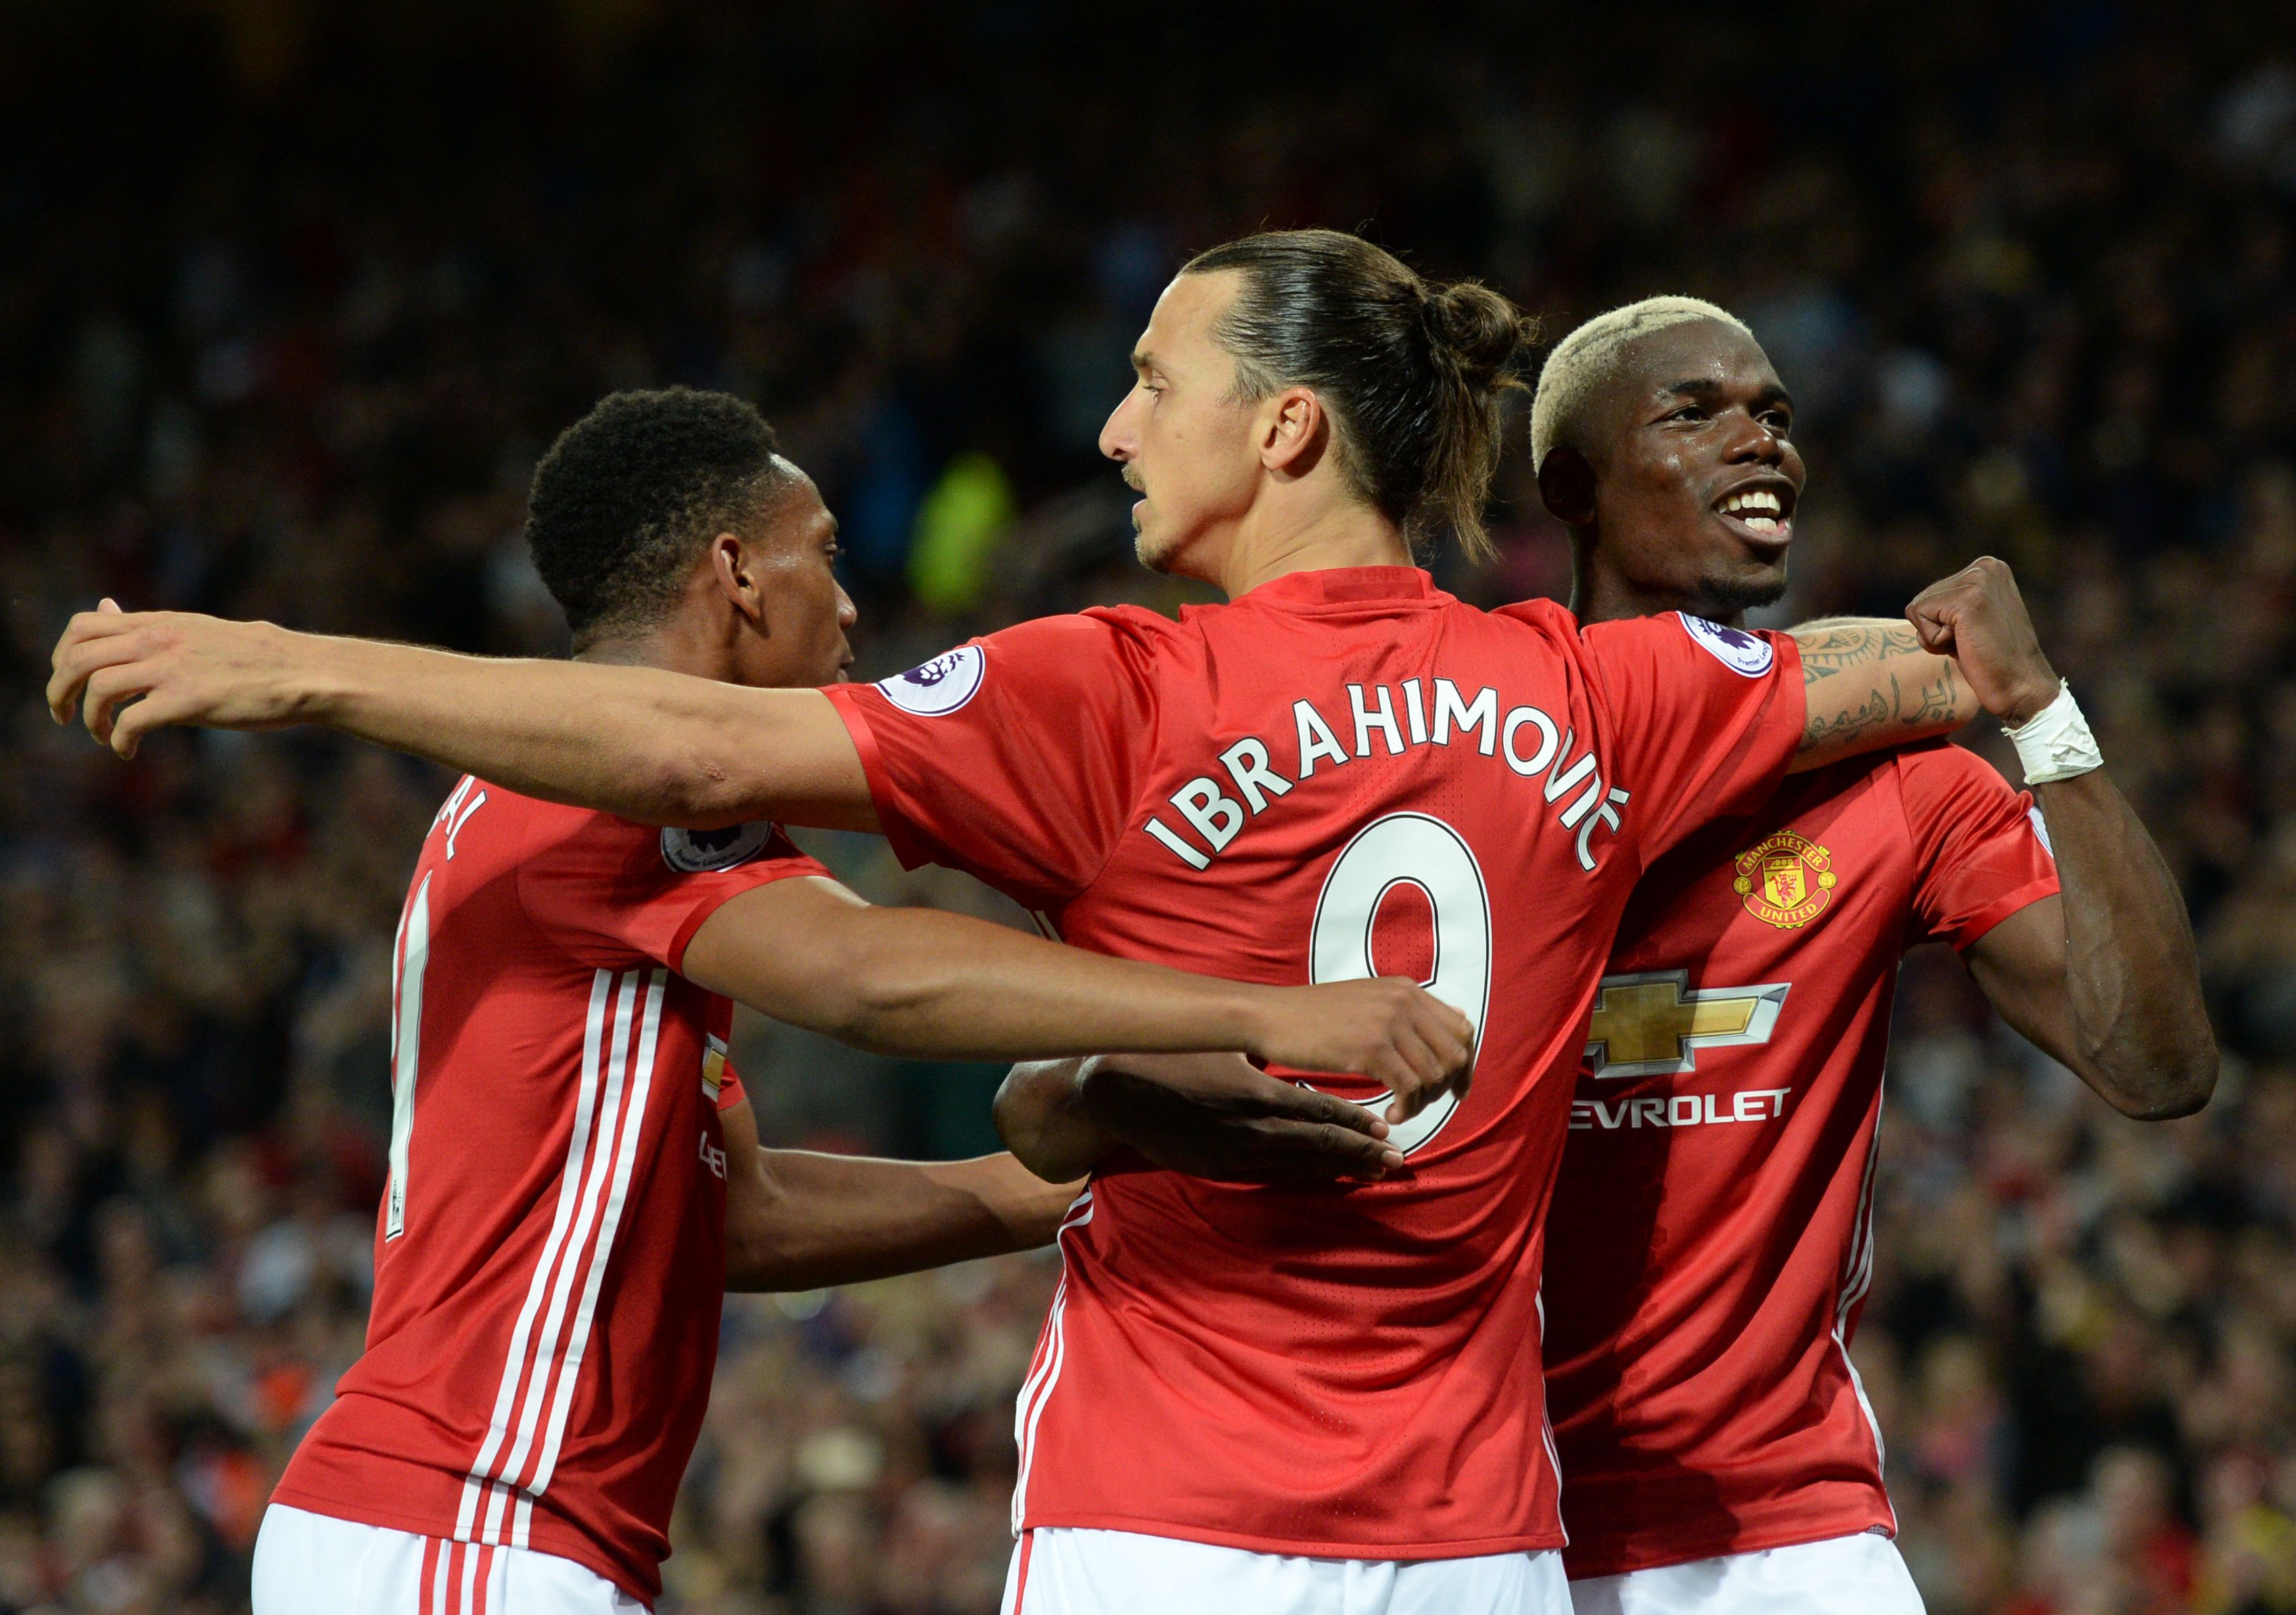 Manchester United's Swedish striker Zlatan Ibrahimovic (C) celebrates with Manchester United's French midfielder Paul Pogba (R) and Manchester United's French striker Anthony Martial after scoring their second goal from the penalty spot during the English Premier League football match between Manchester United and Southampton at Old Trafford in Manchester, north west England, on August 19, 2016. / AFP / Oli SCARFF / RESTRICTED TO EDITORIAL USE. No use with unauthorized audio, video, data, fixture lists, club/league logos or 'live' services. Online in-match use limited to 75 images, no video emulation. No use in betting, games or single club/league/player publications.  /         (Photo credit should read OLI SCARFF/AFP/Getty Images)